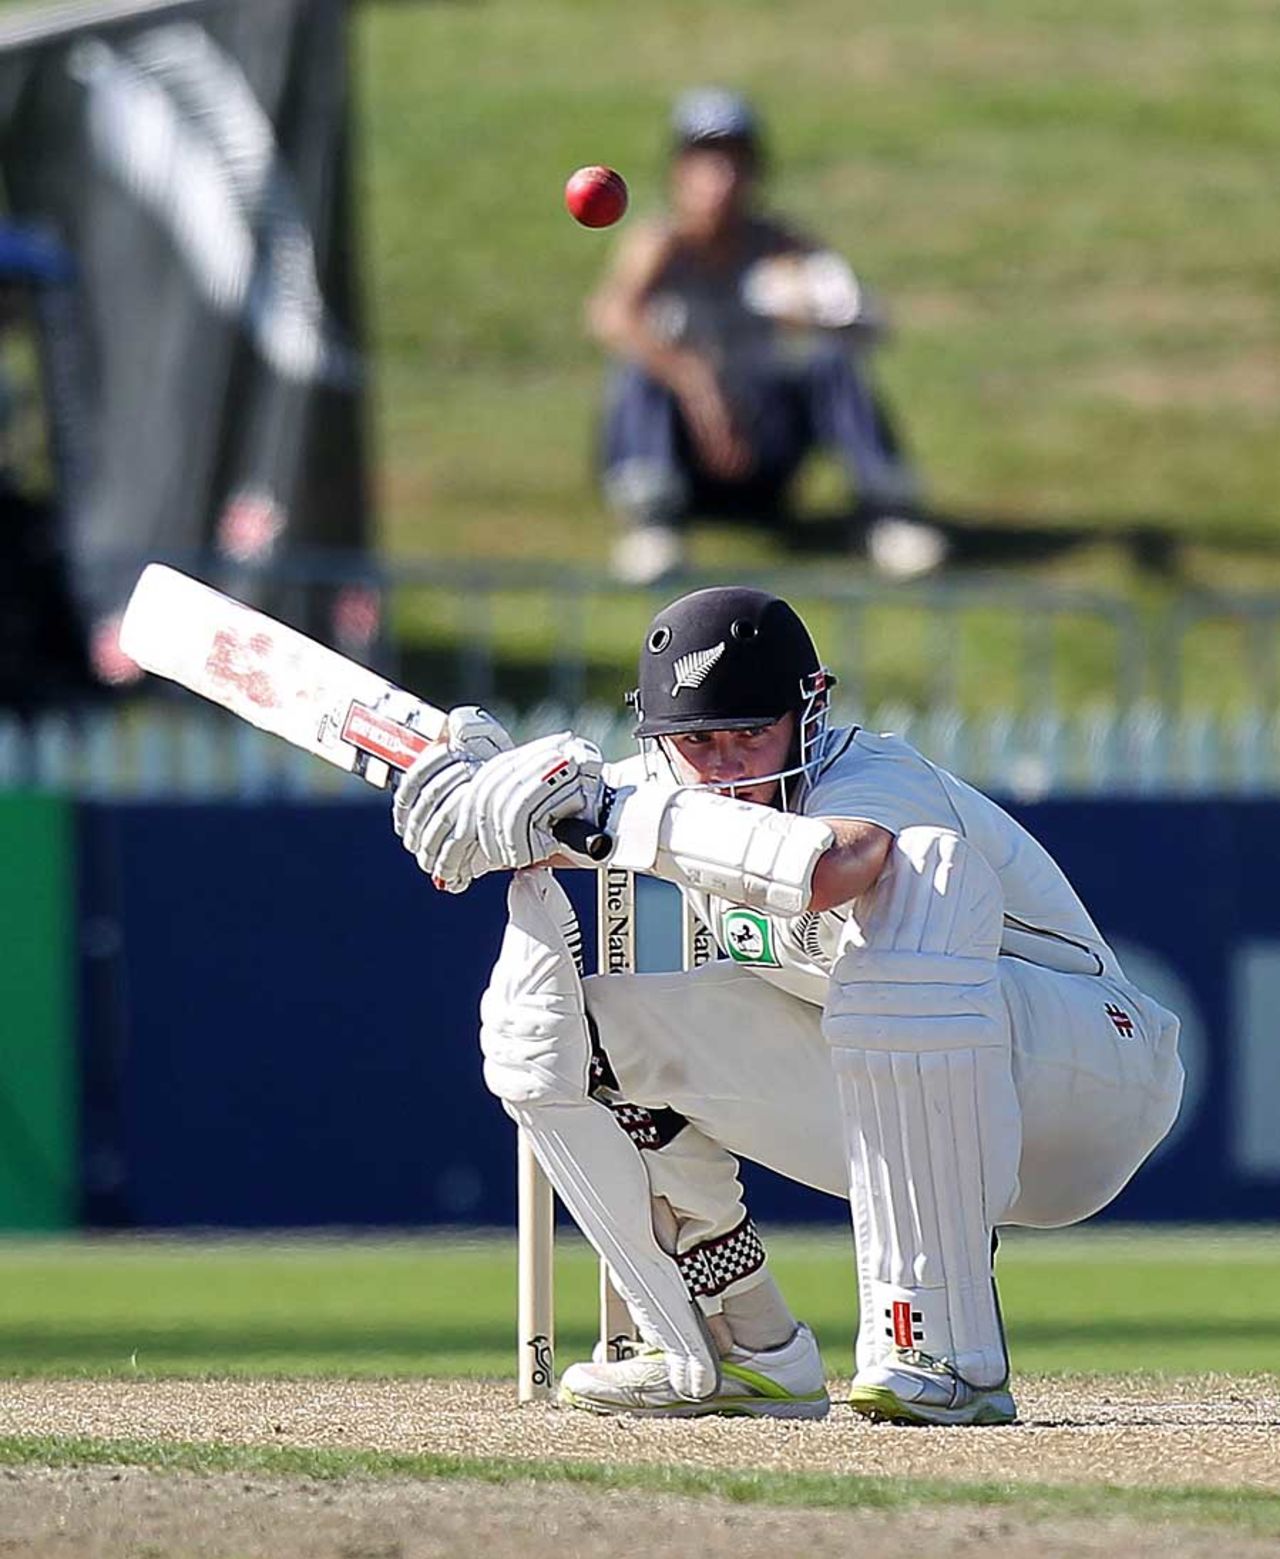 Kane Williamson ducks under a bouncer, New Zealand v South Africa, 2nd Test, Hamilton, 3rd day, March 17, 2012